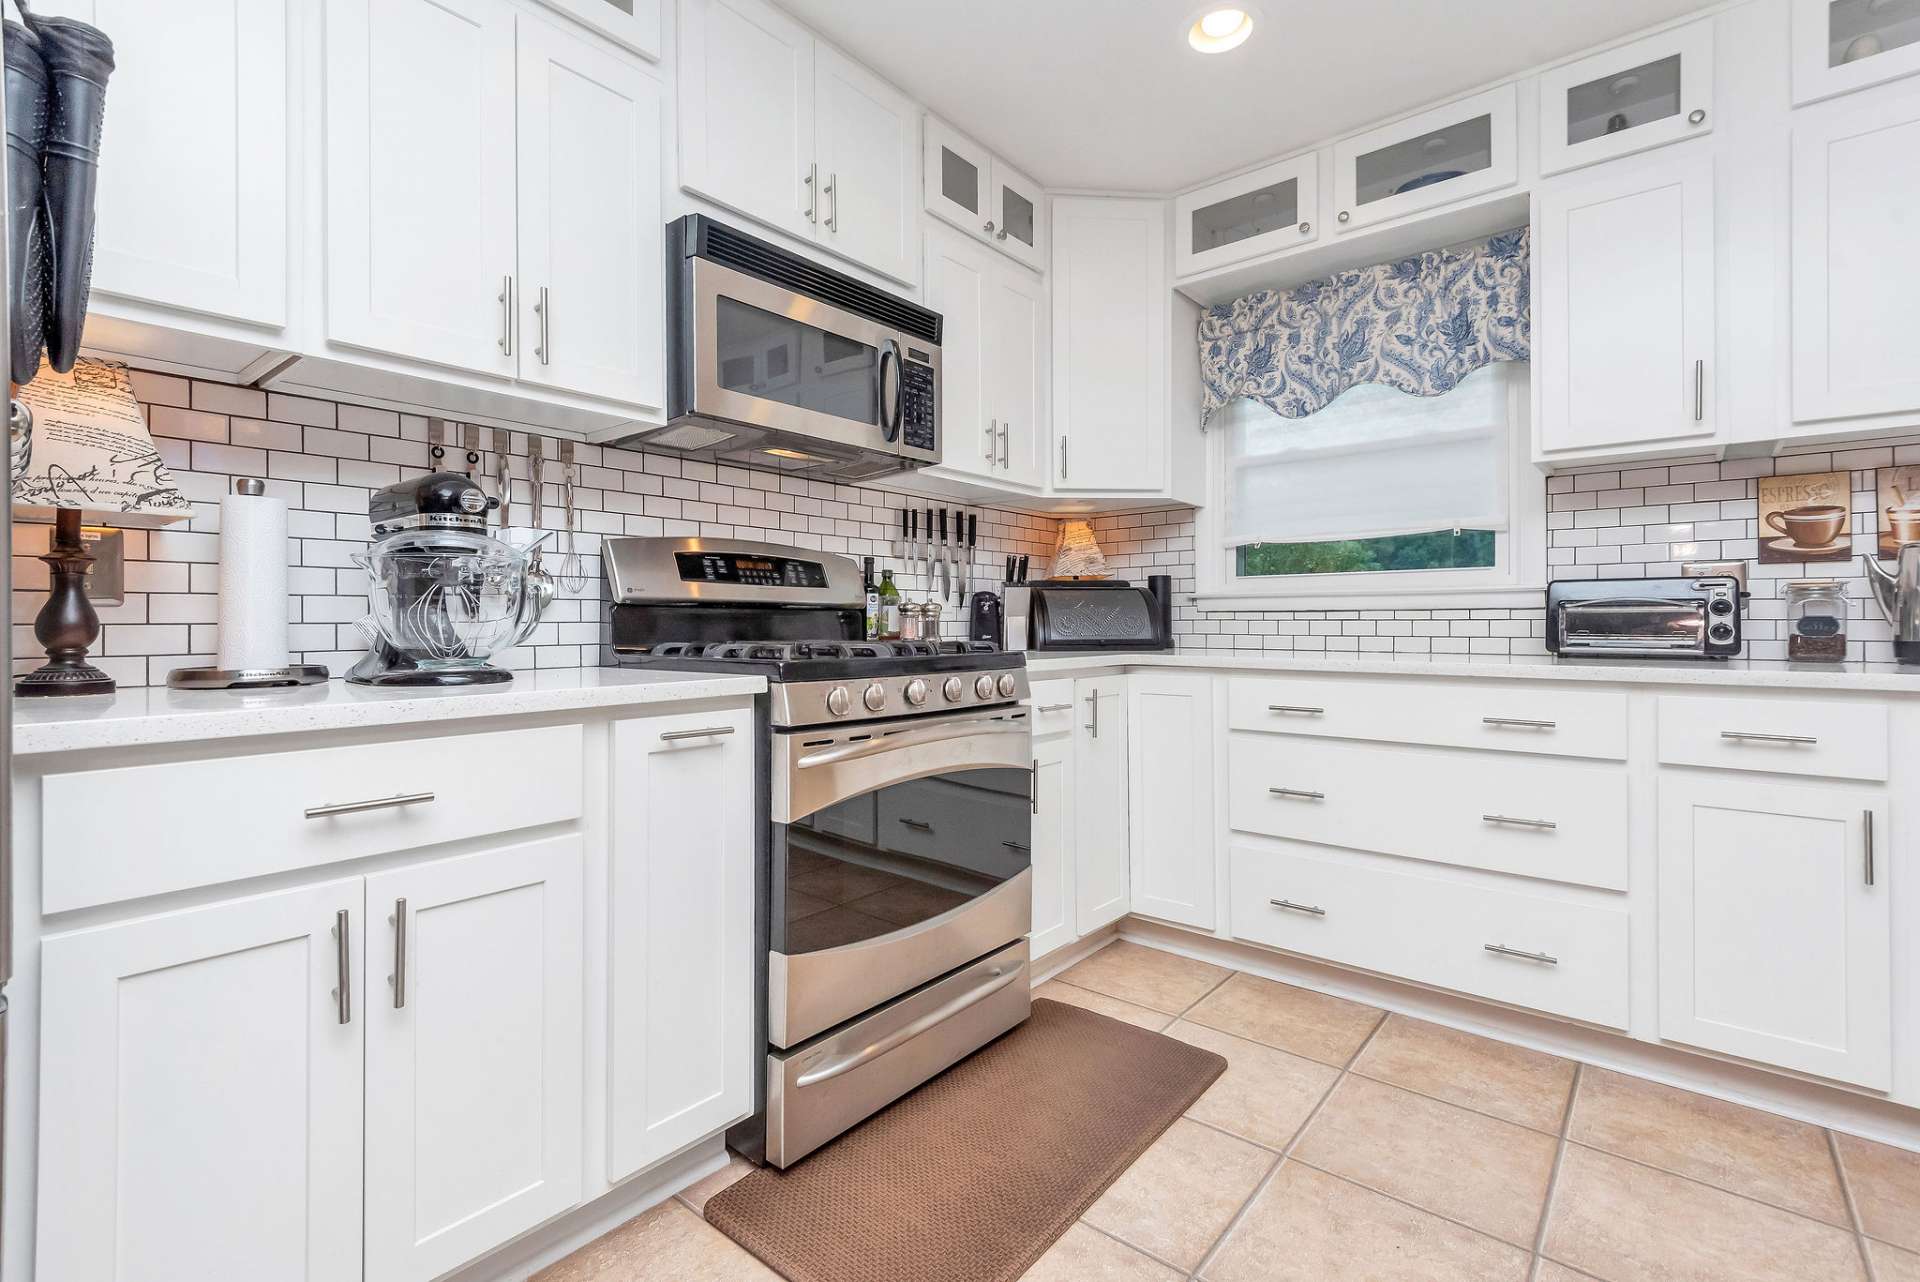 Solid surface countertops and white tile backsplash add to the open feel of the kitchen